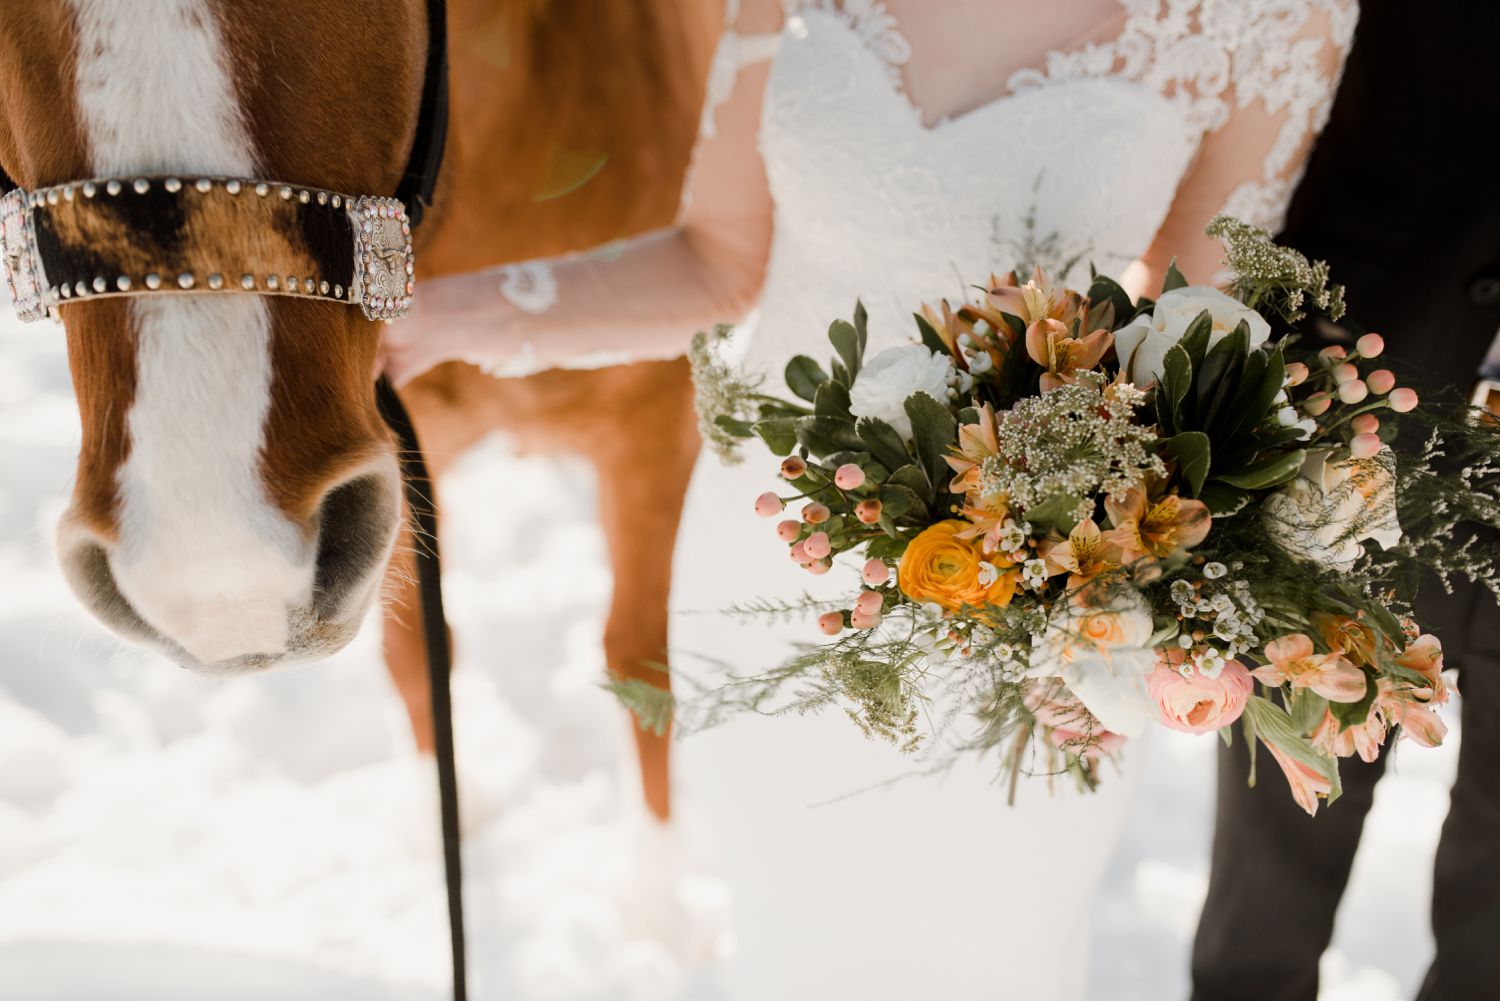 Canadian winter wedding styled shoot at a horse farm. Photographed by Vanessa Renae Photography, a Canadian and winnipeg wedding photographer.